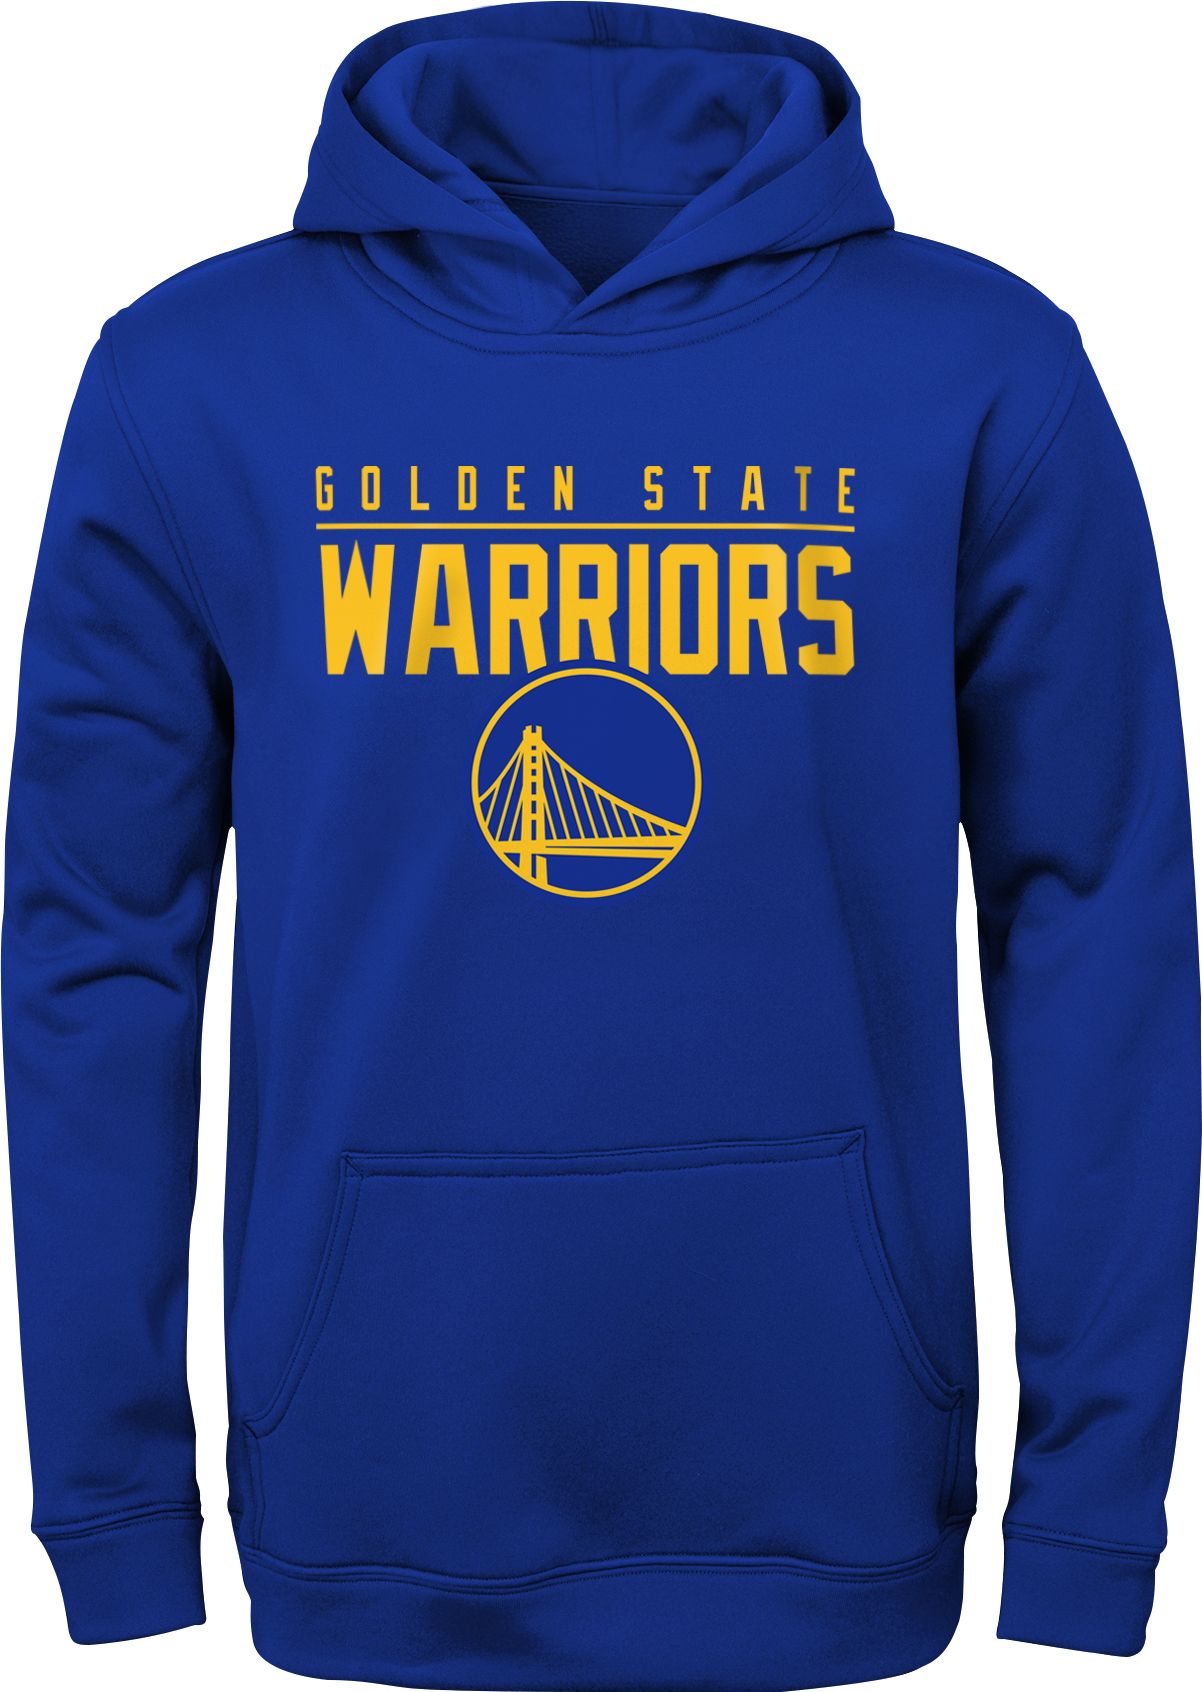 Nike Youth Golden State Warriors Hoodie Top Sellers, 20 OFF   www ...